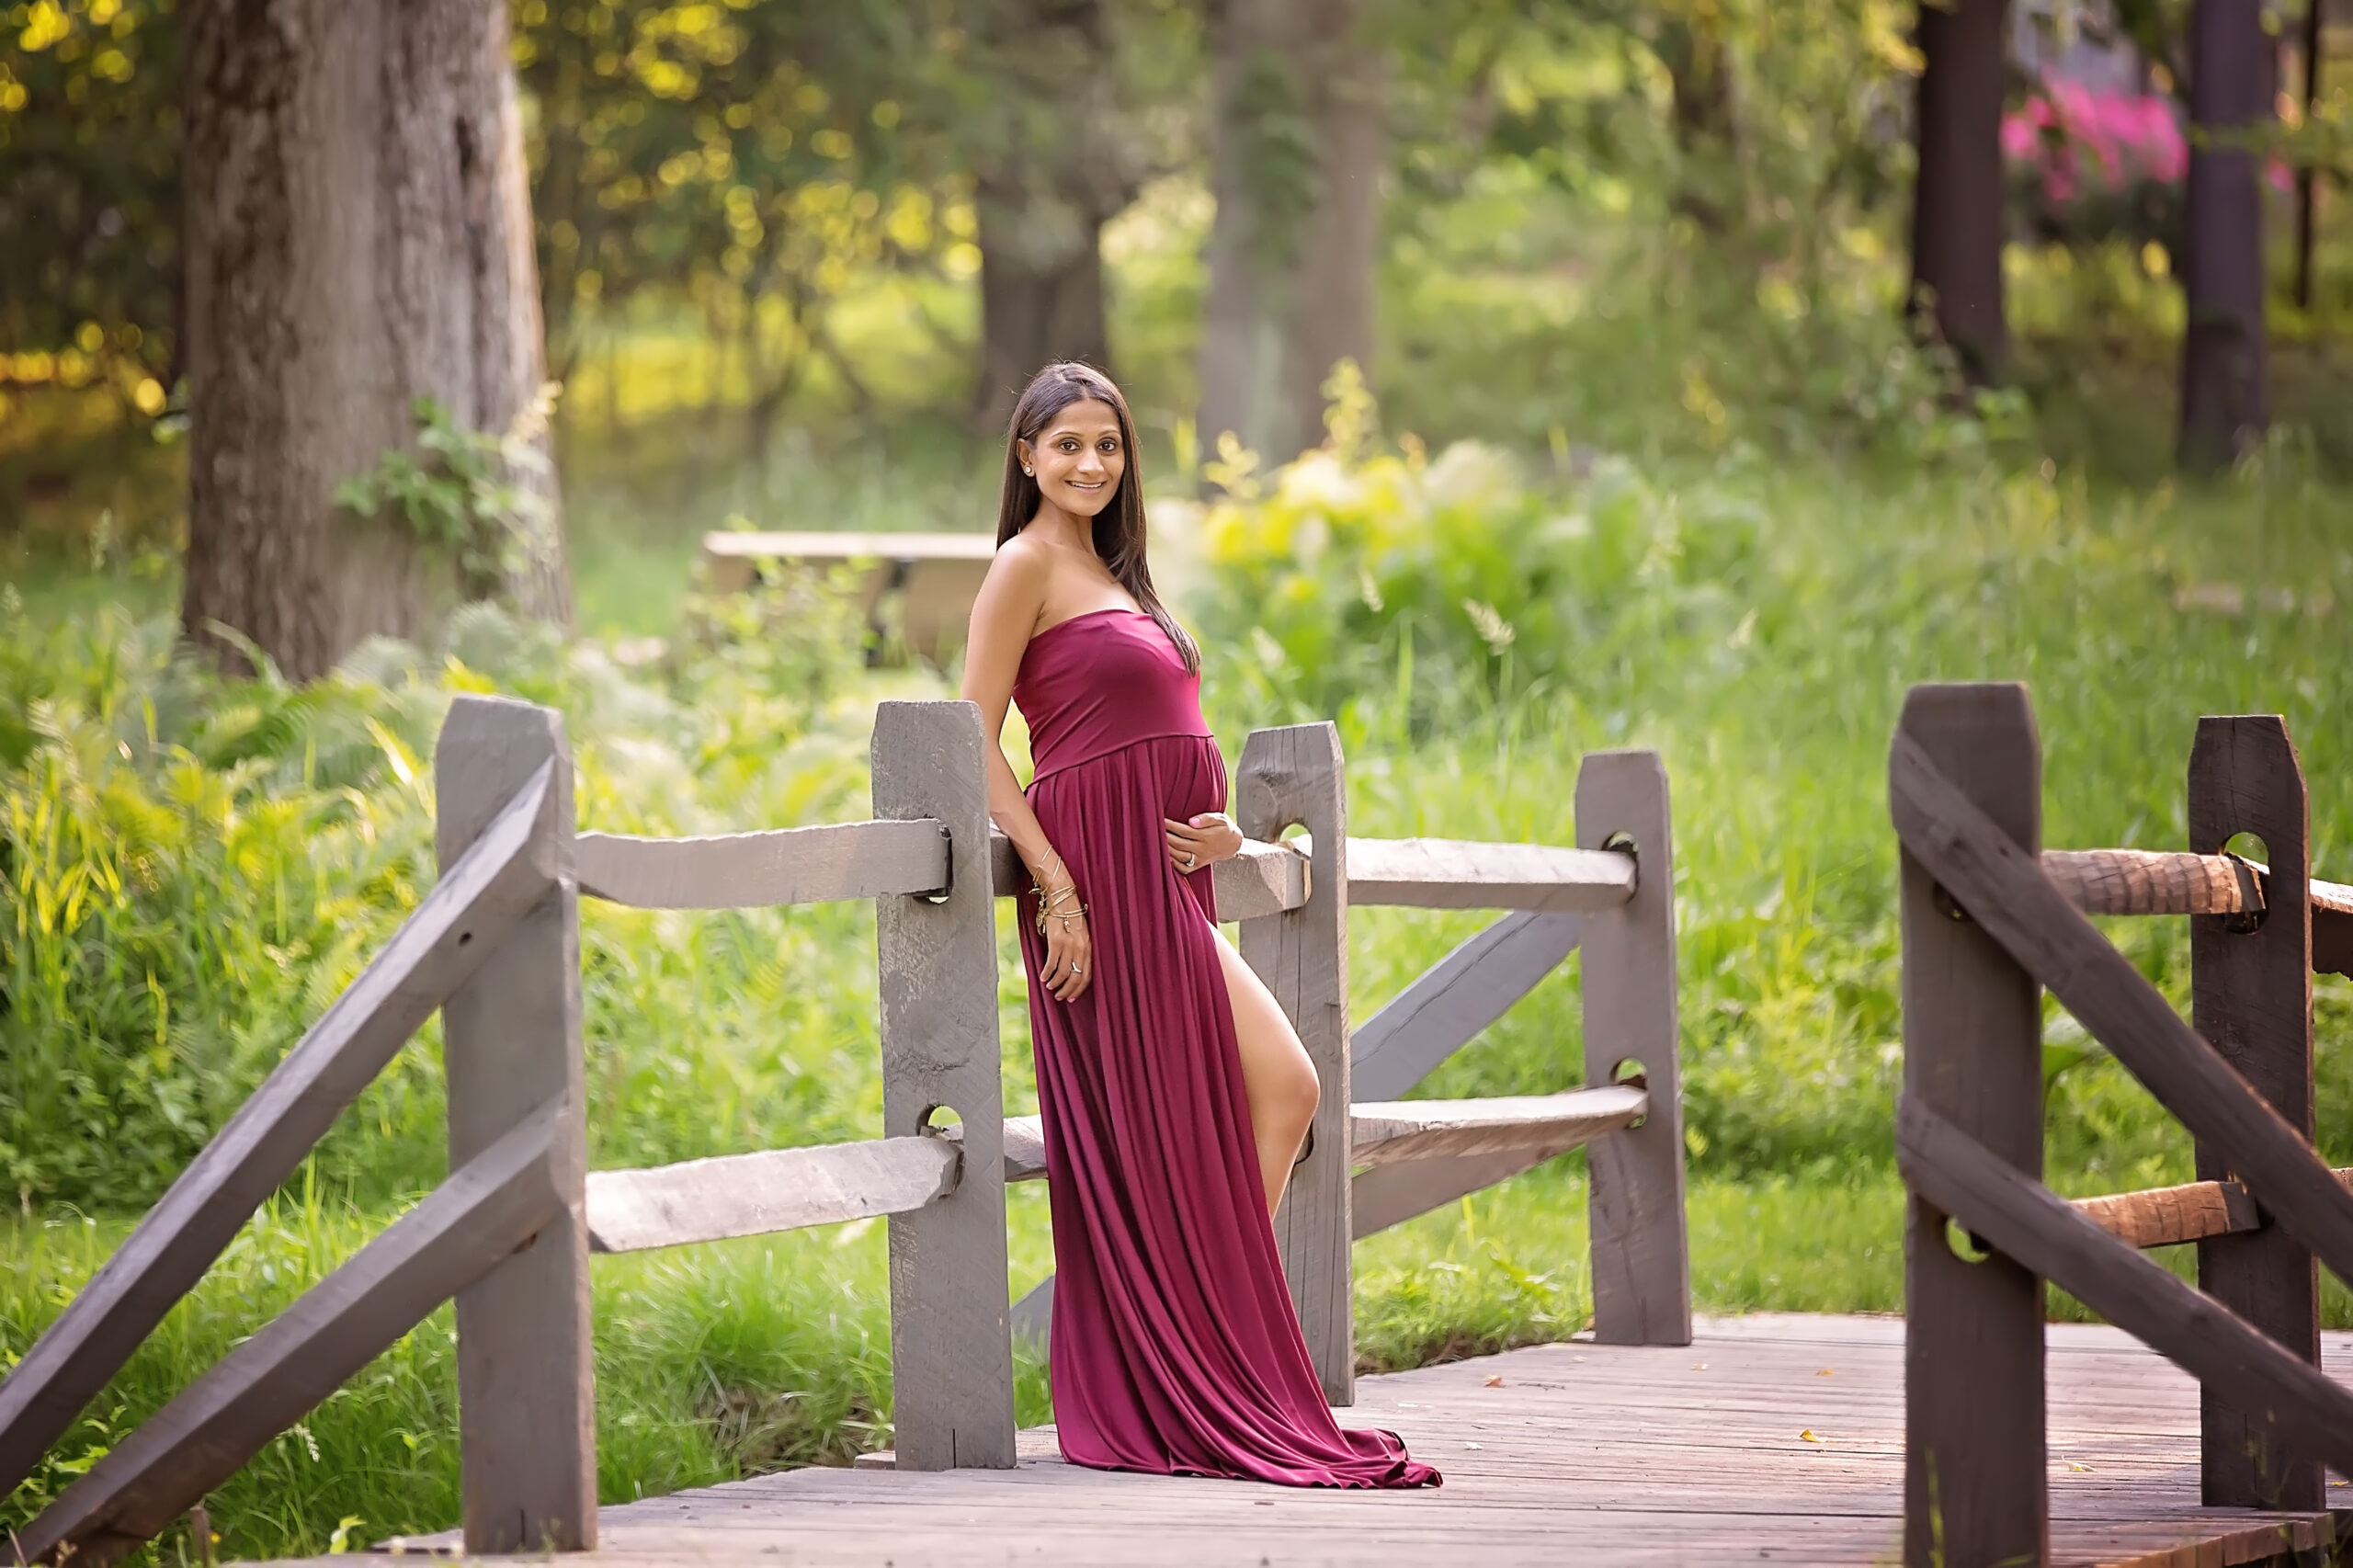 What to wear to a maternity photoshoot